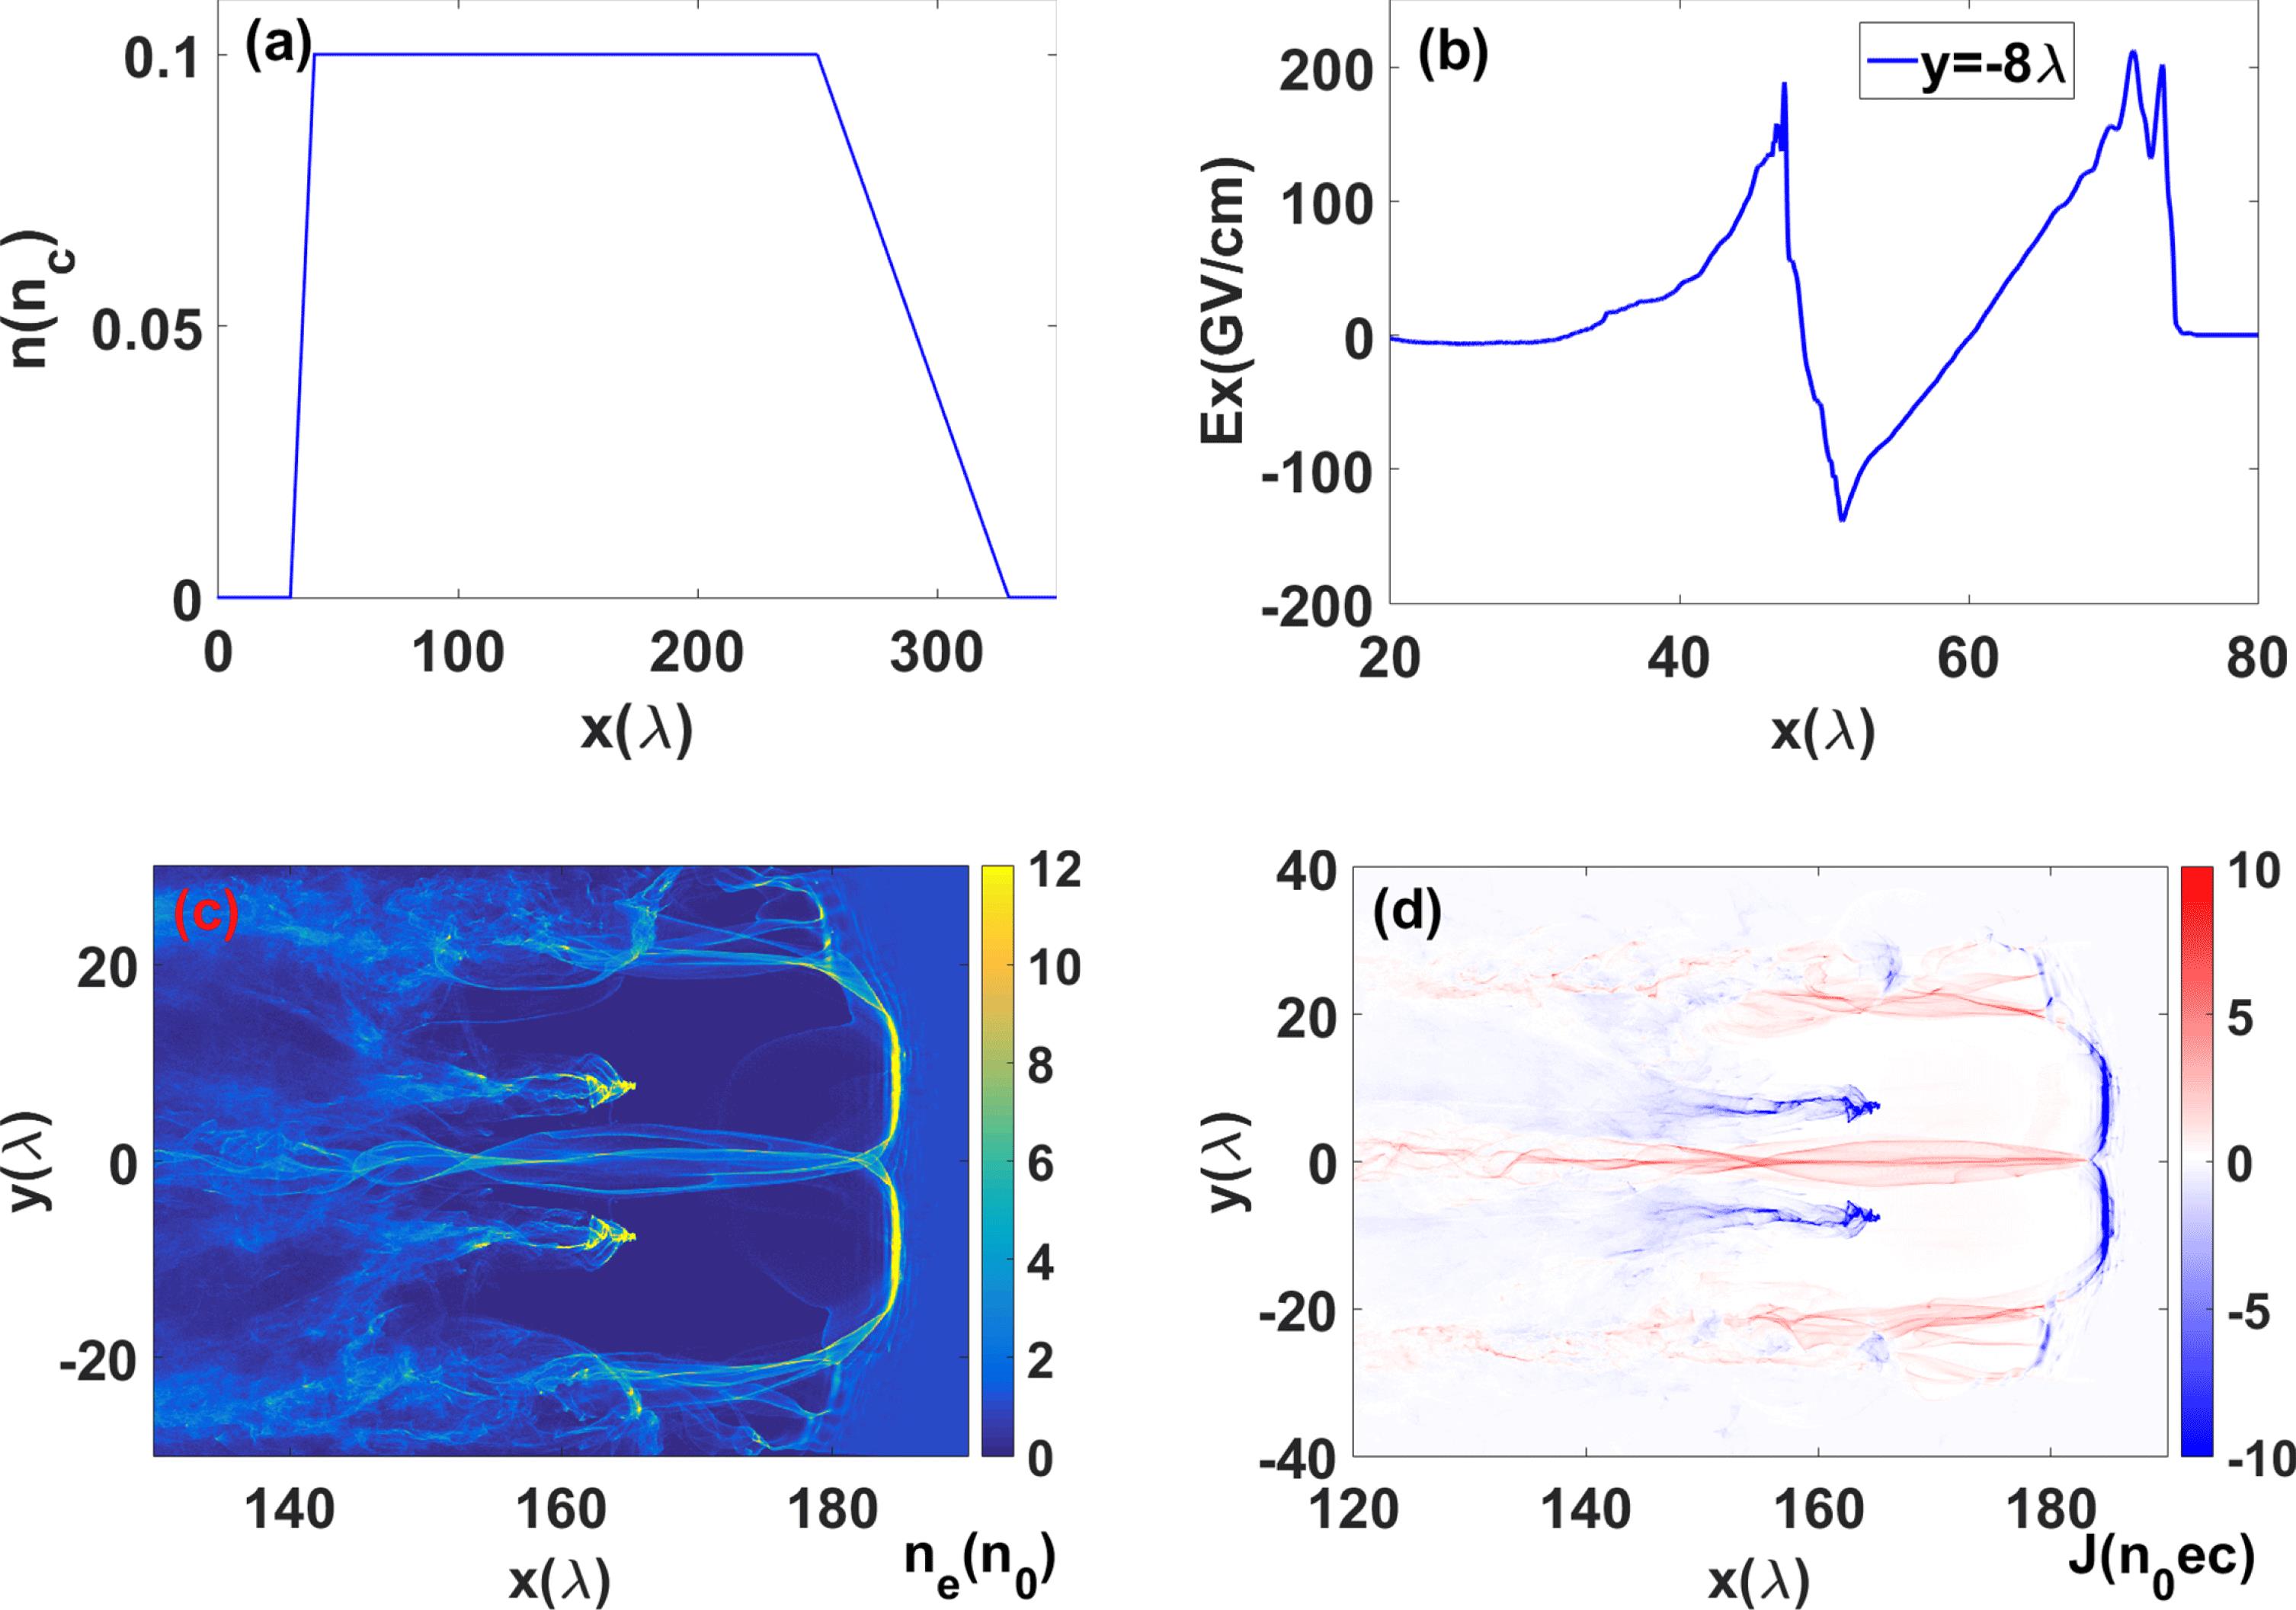 (a) The initial density profile of the plasma. (b) The longitudinal electric field along $y=-8{\it\lambda}$ at $t=75T_{0}$. (c) and (d) are the electron density and current distribution at $190T_{0}$.